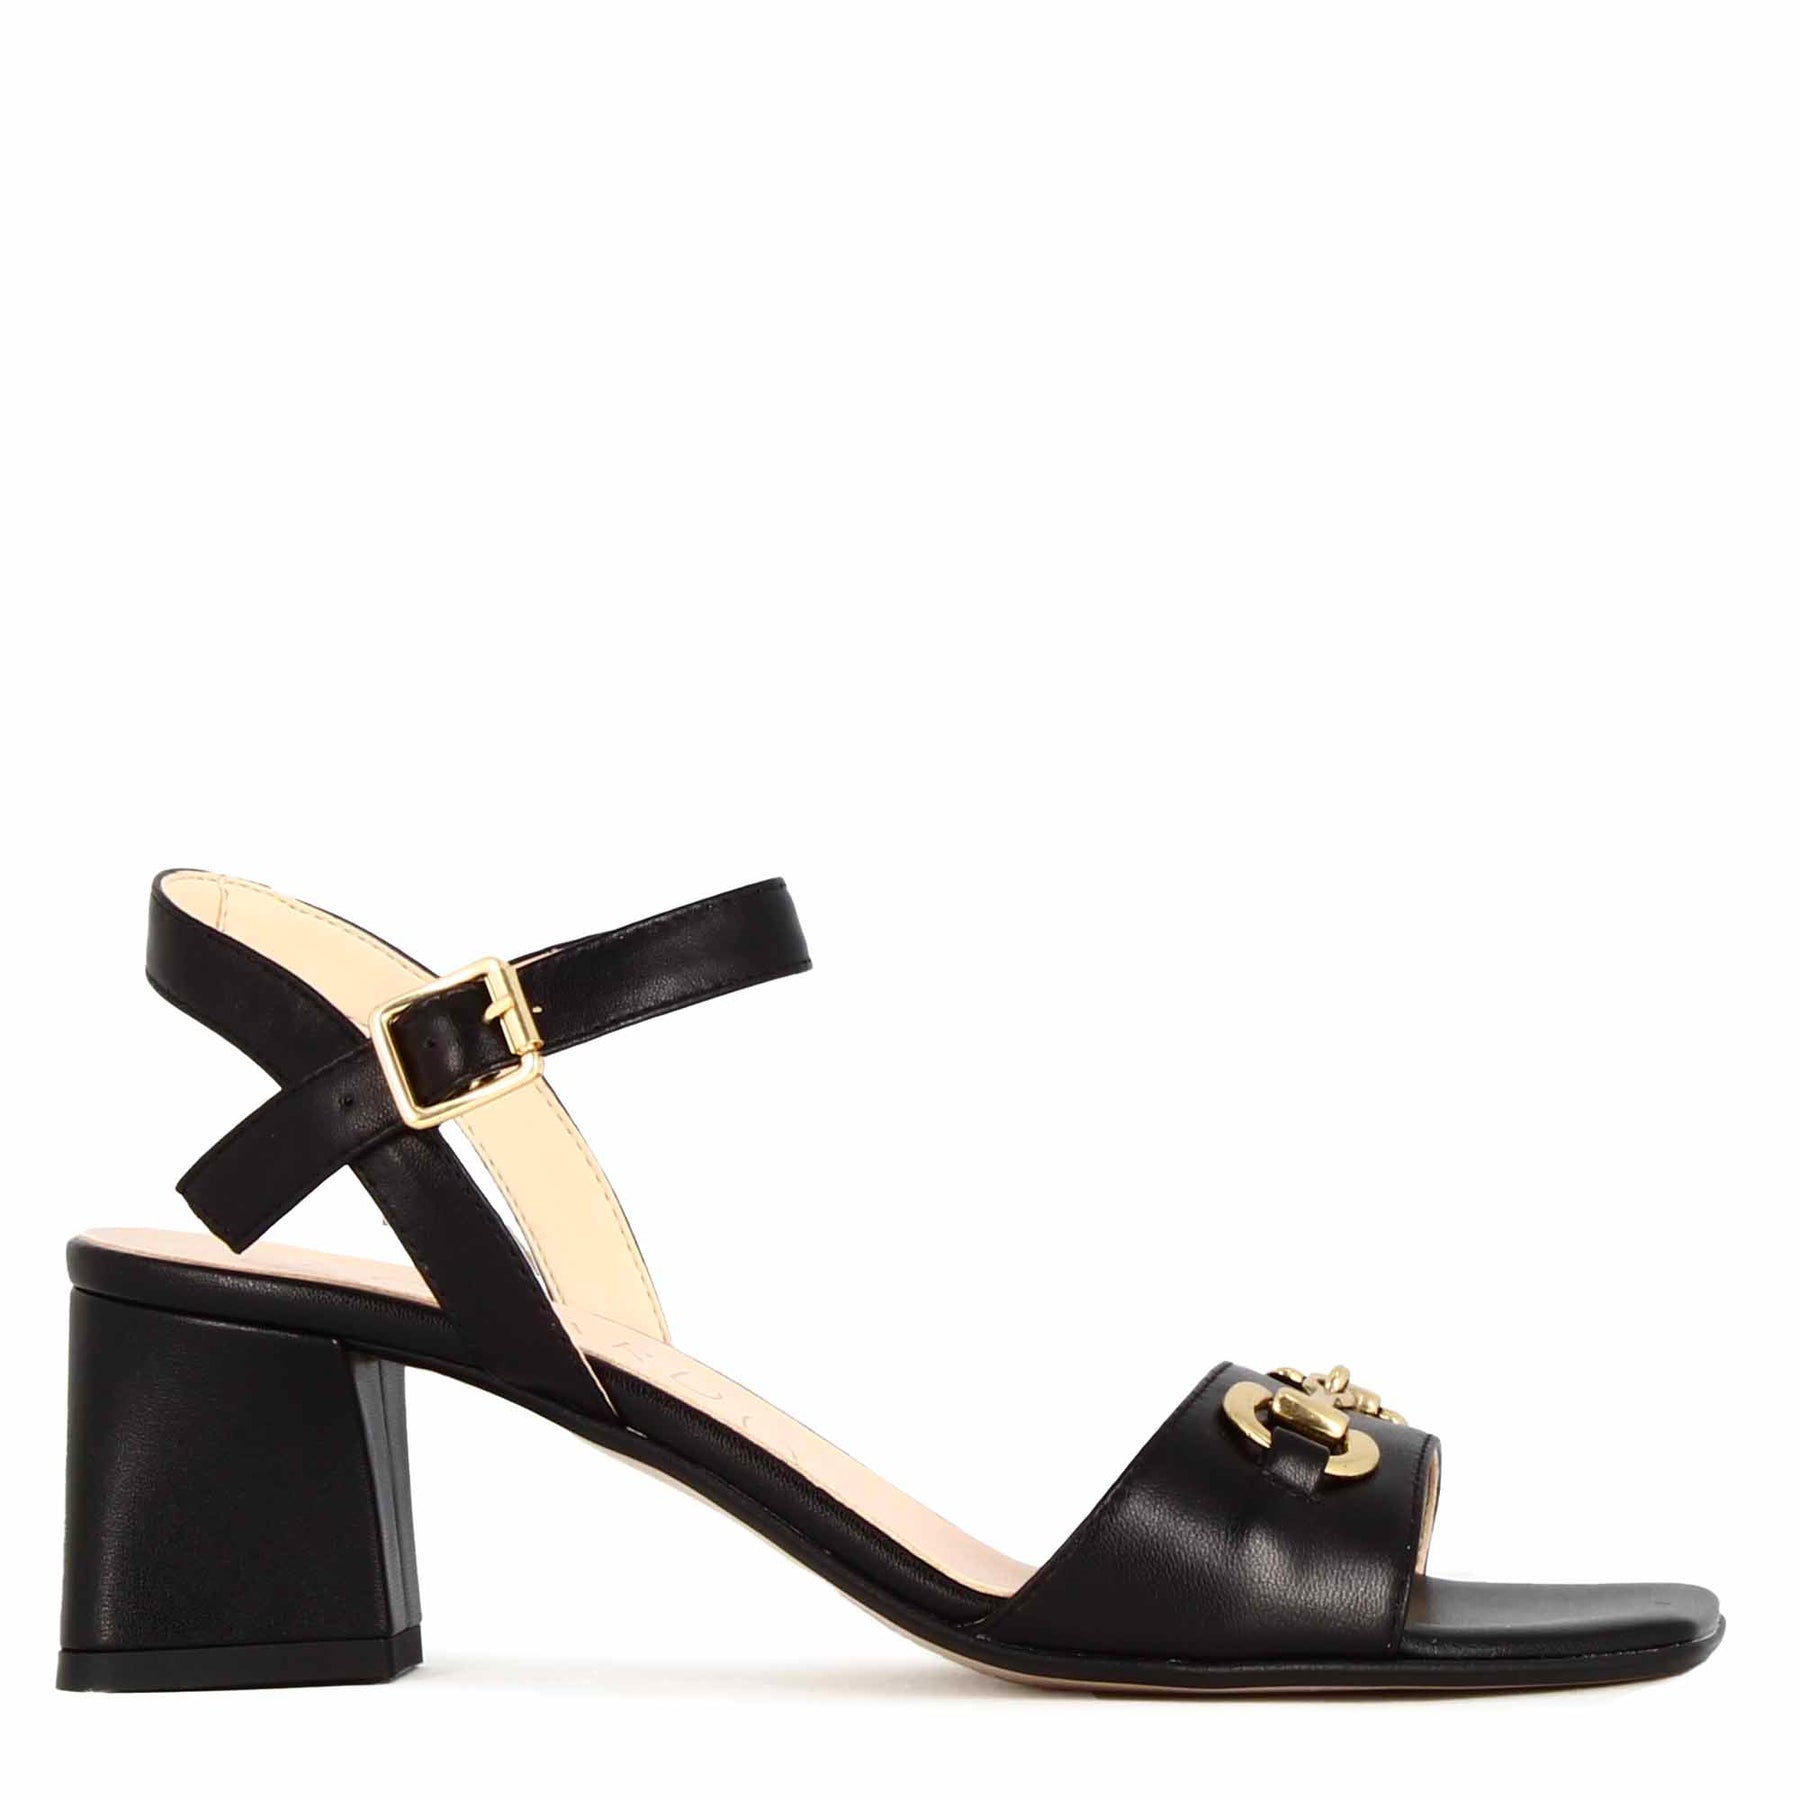 Women's sandal in black leather with handmade clamp